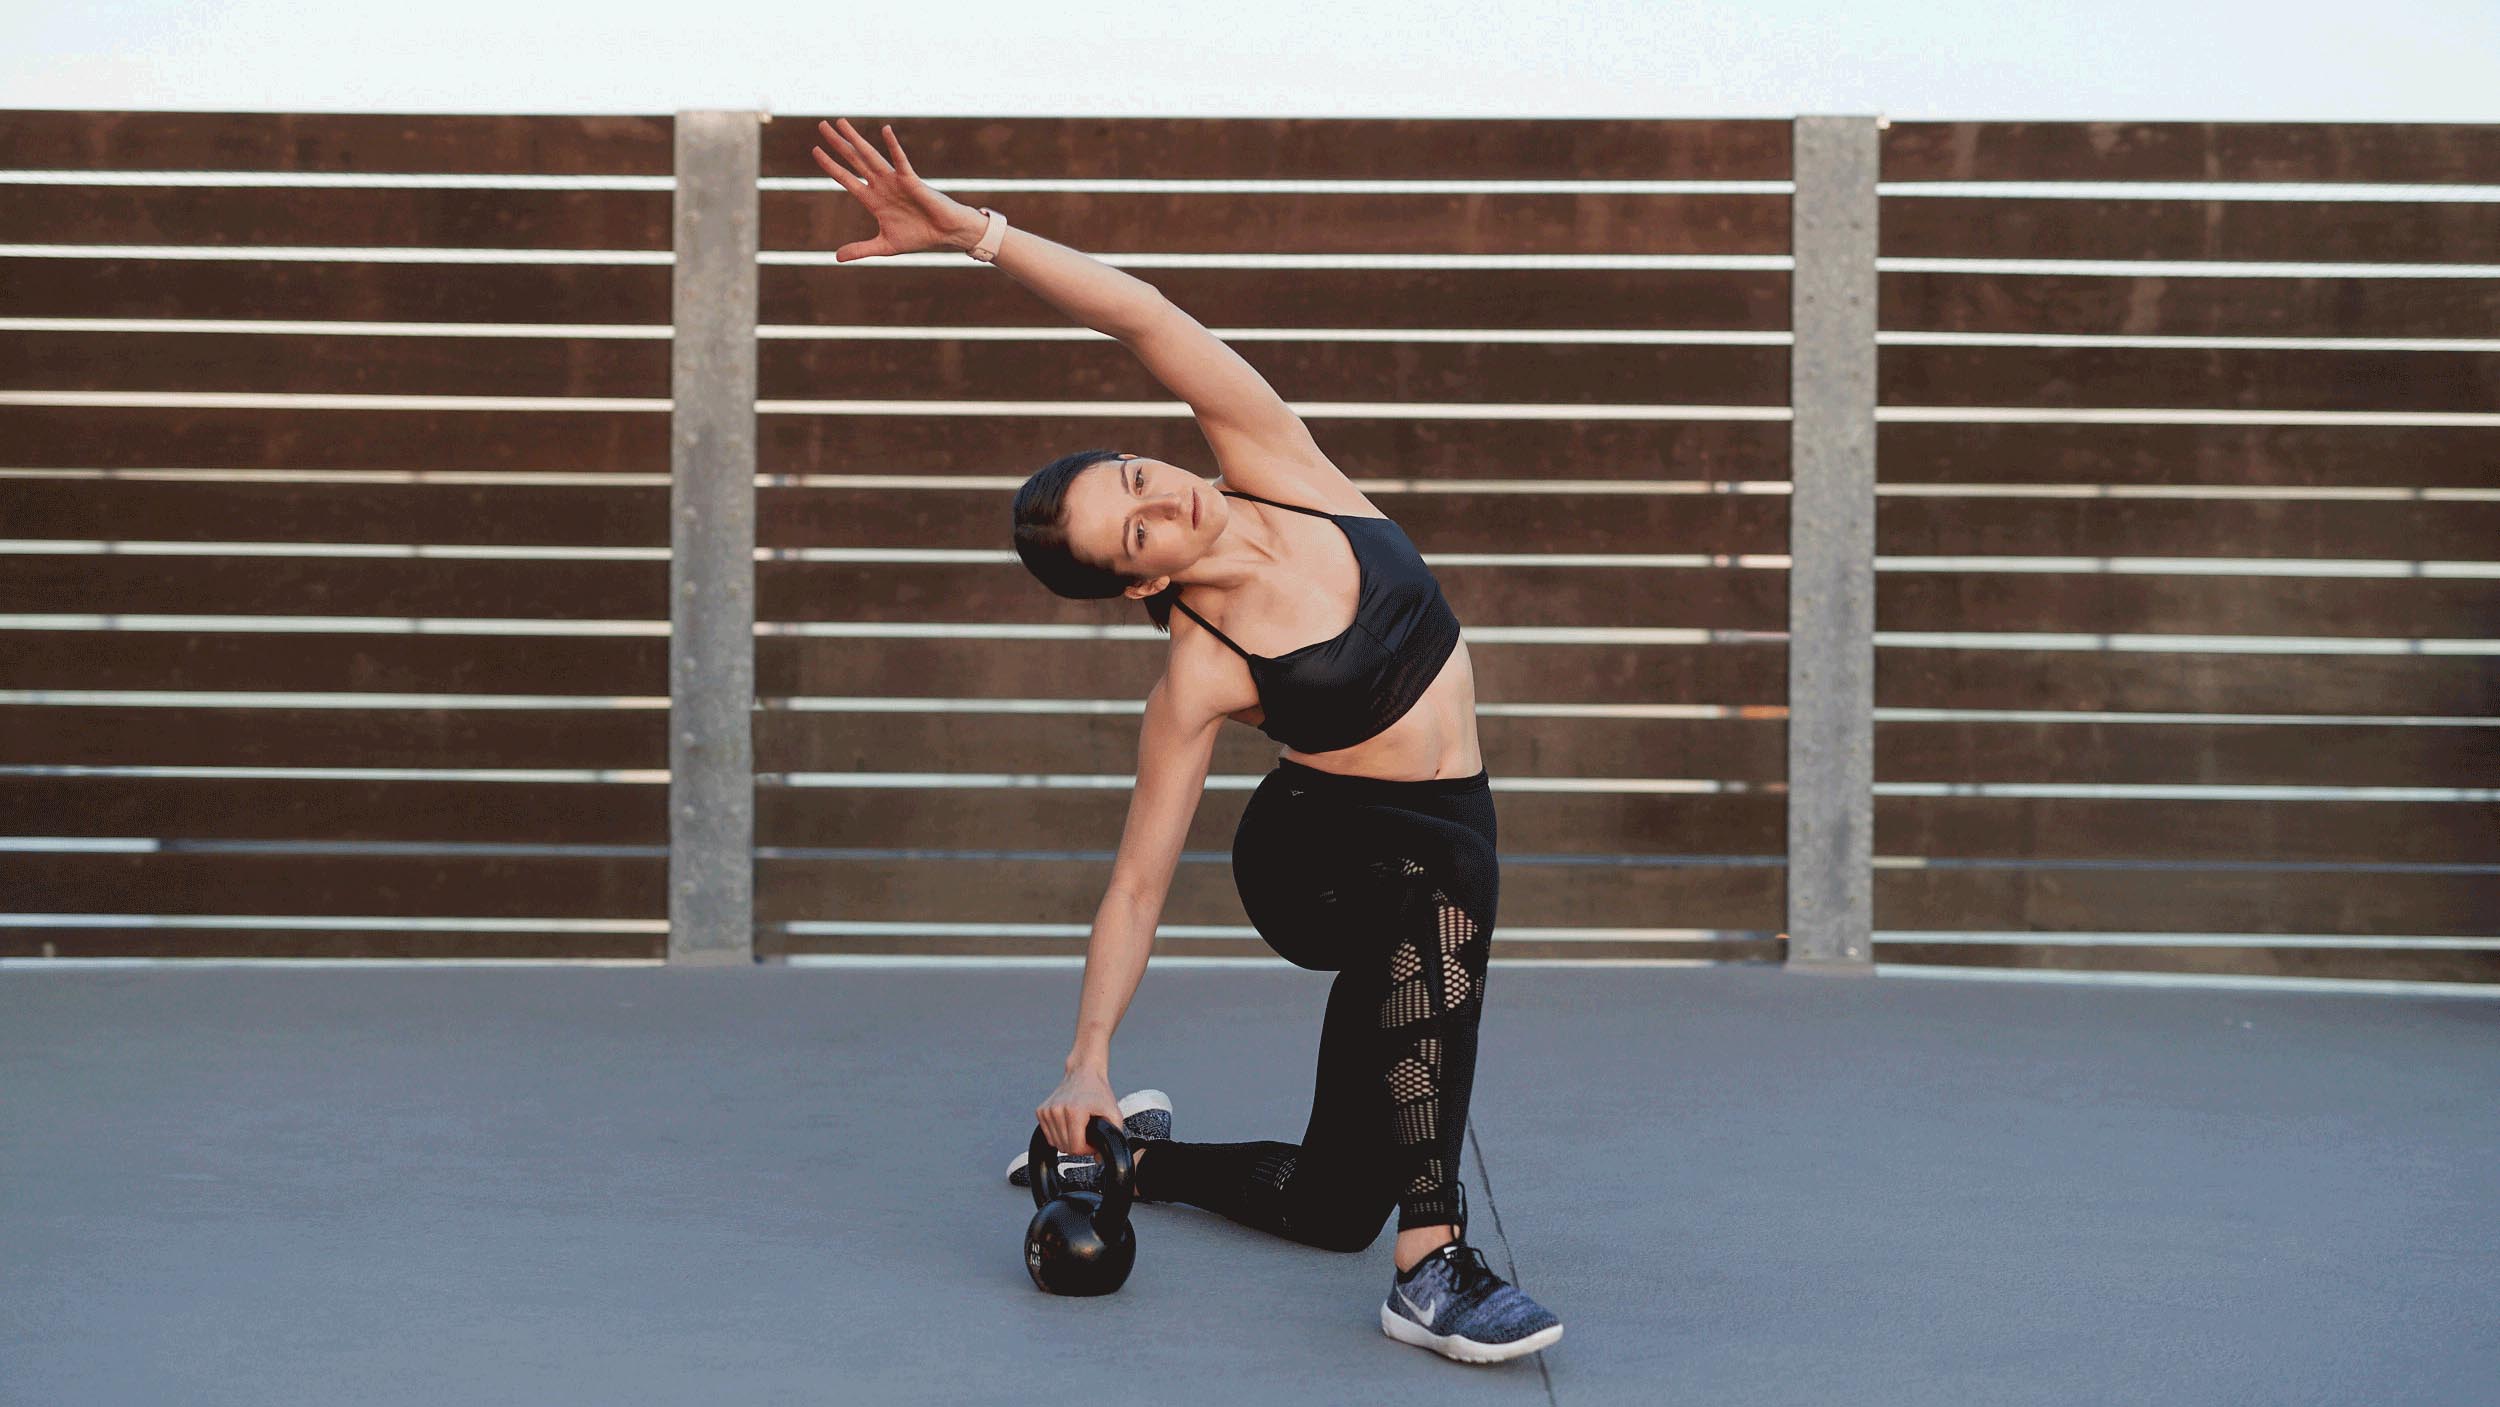 The kettlebell cool-down - Furthermore